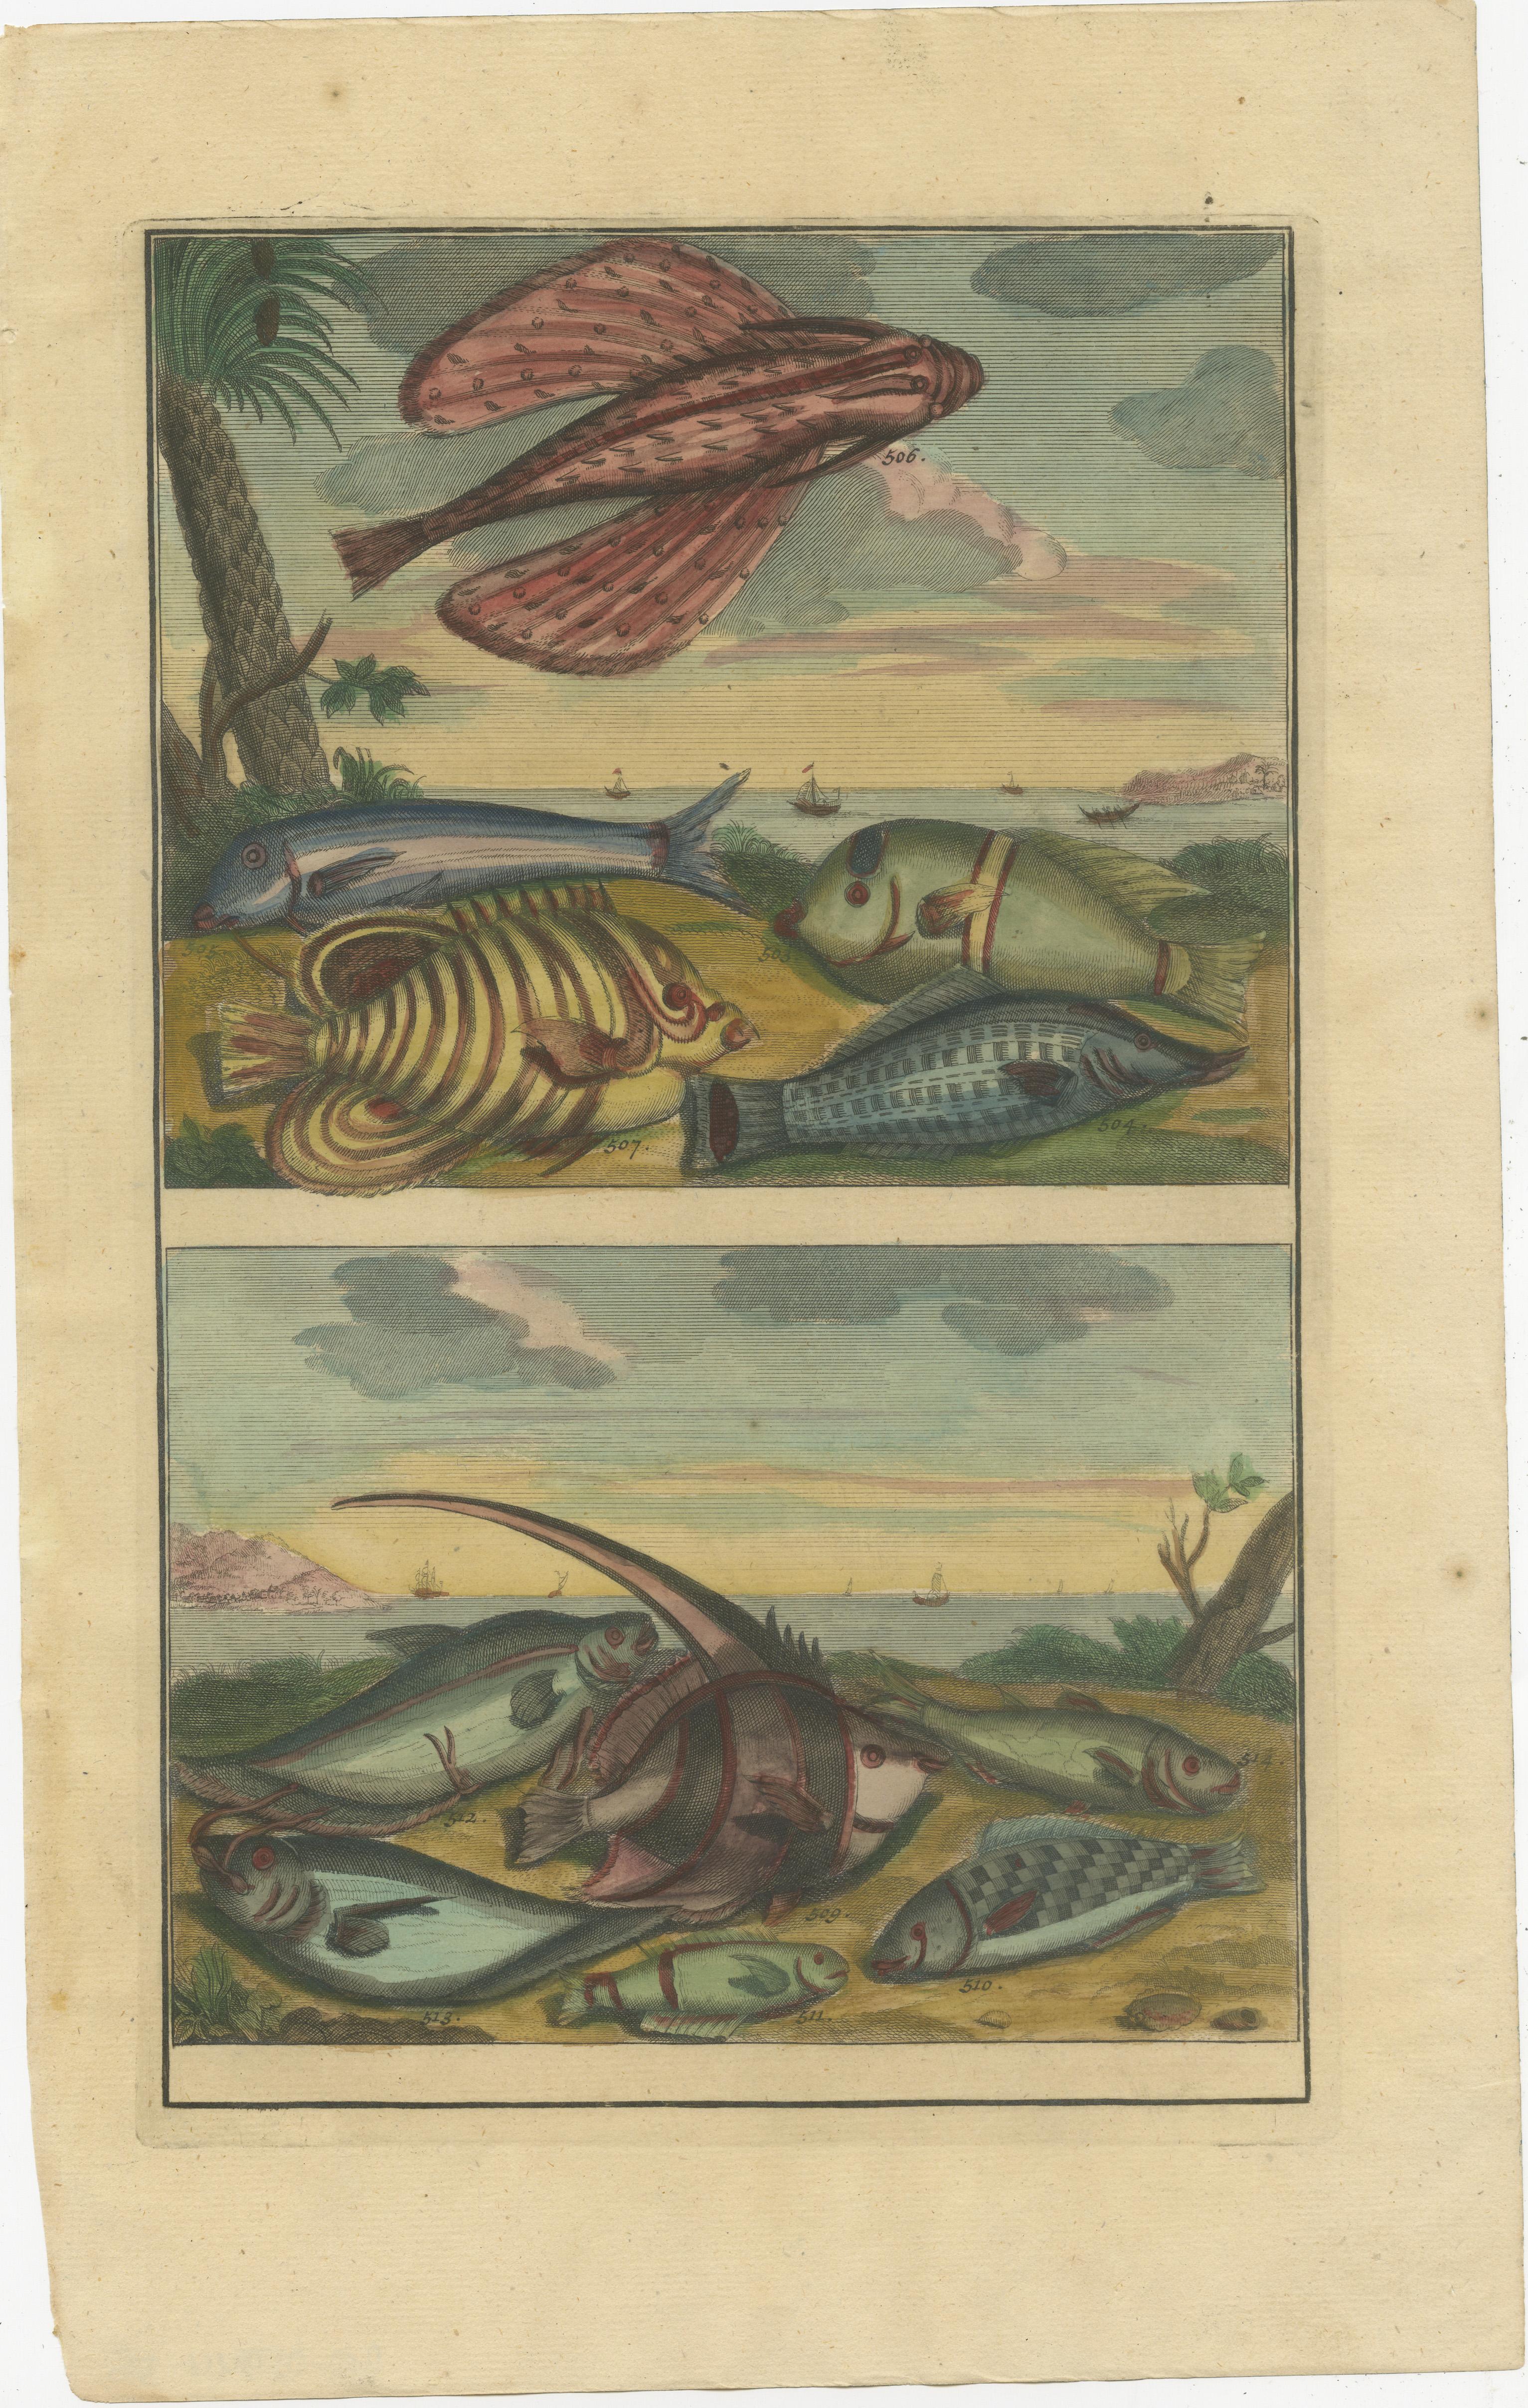 Set of twelve antique prints of various fish species and marine life. These print originate from 'Oud en Nieuw Oost-Indiën' by F. Valentijn.

François Valentyn or Valentijn (17 April 1666 – 6 August 1727) was a Dutch Calvinist minister, naturalist